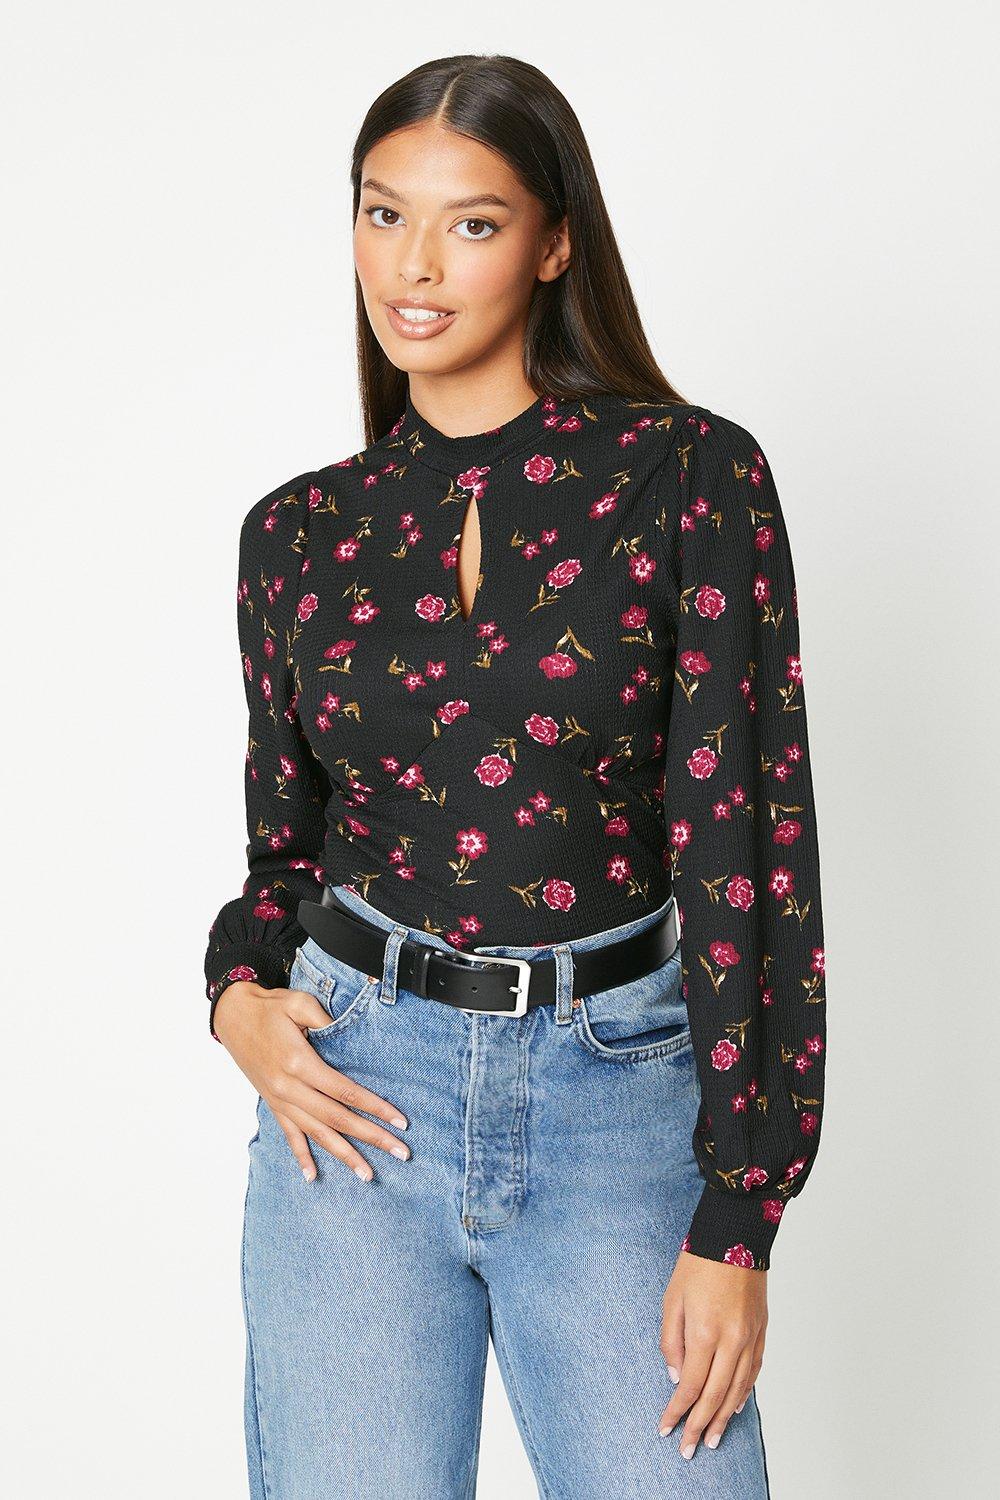 Women’s Red Floral Keyhole Detail Long Sleeve Top - black - S